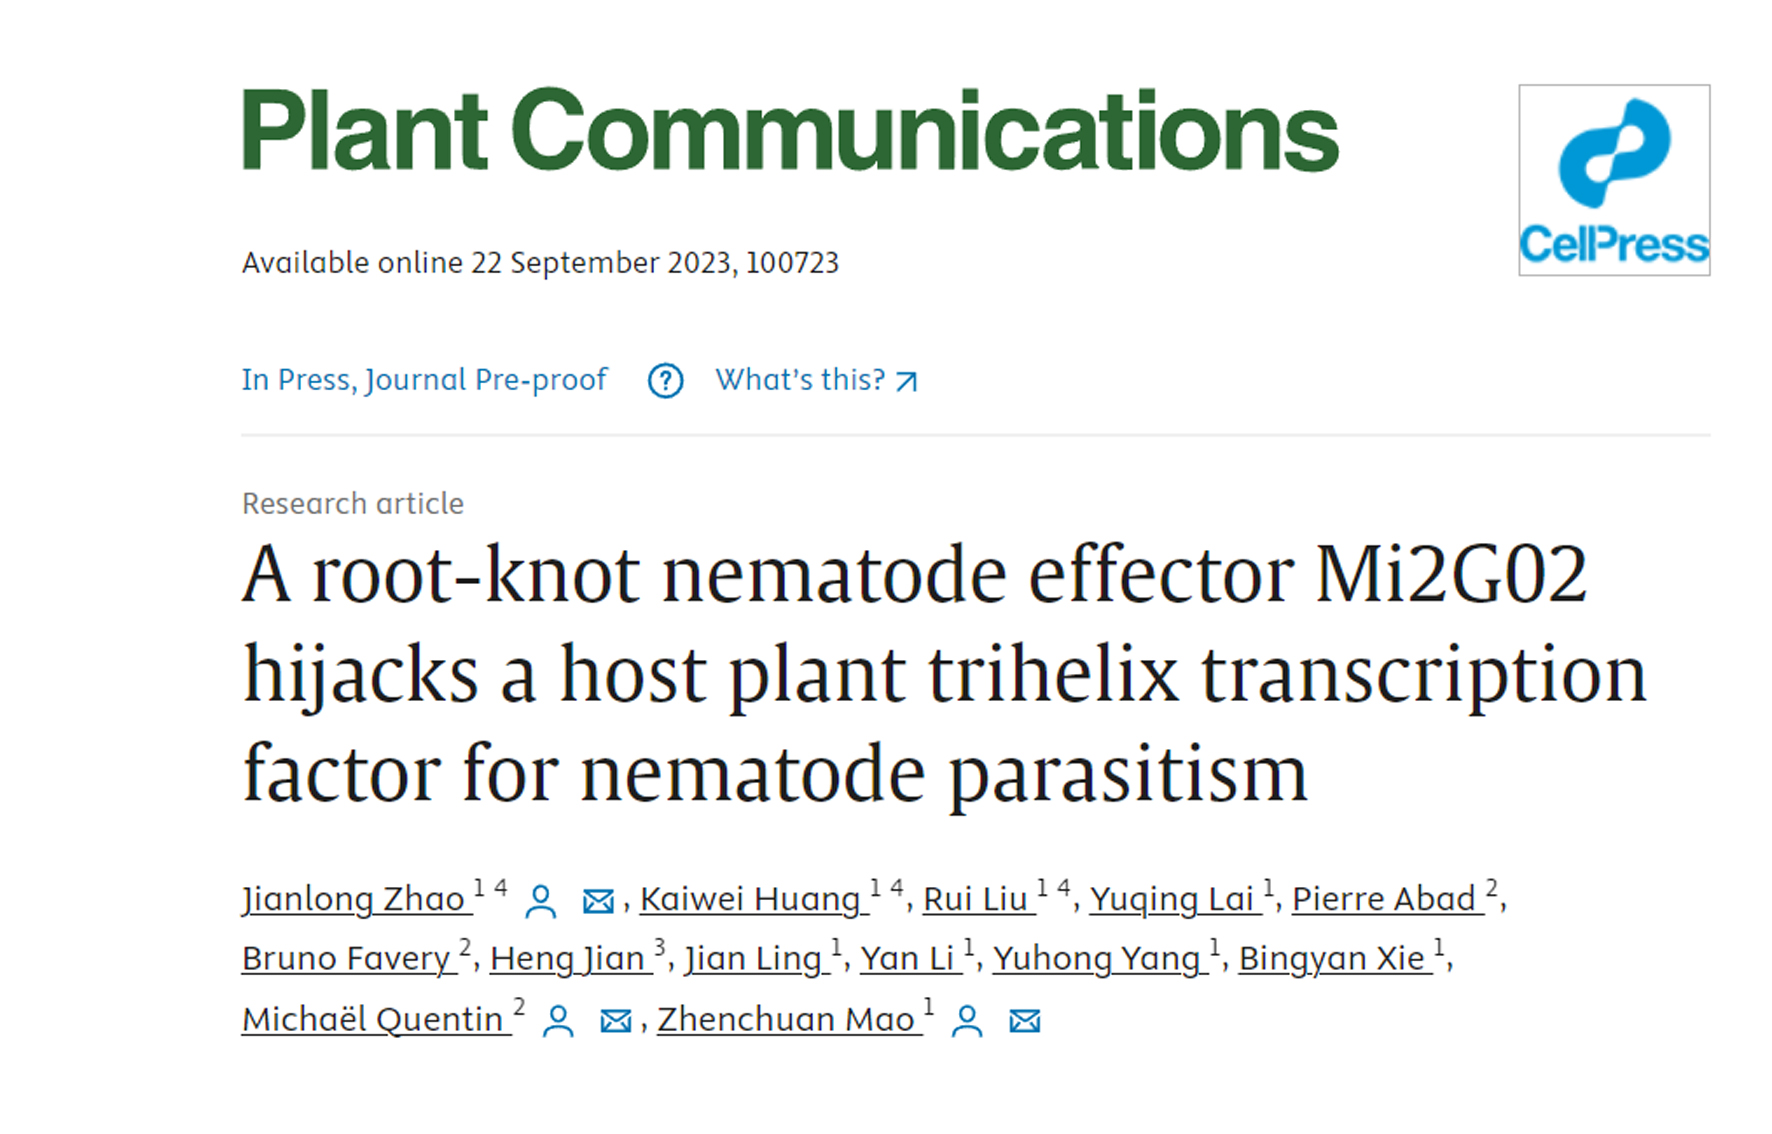 The Institute of Vegetables and Flowers reveals a new molecular mechanism of root-knot nematode effector proteins